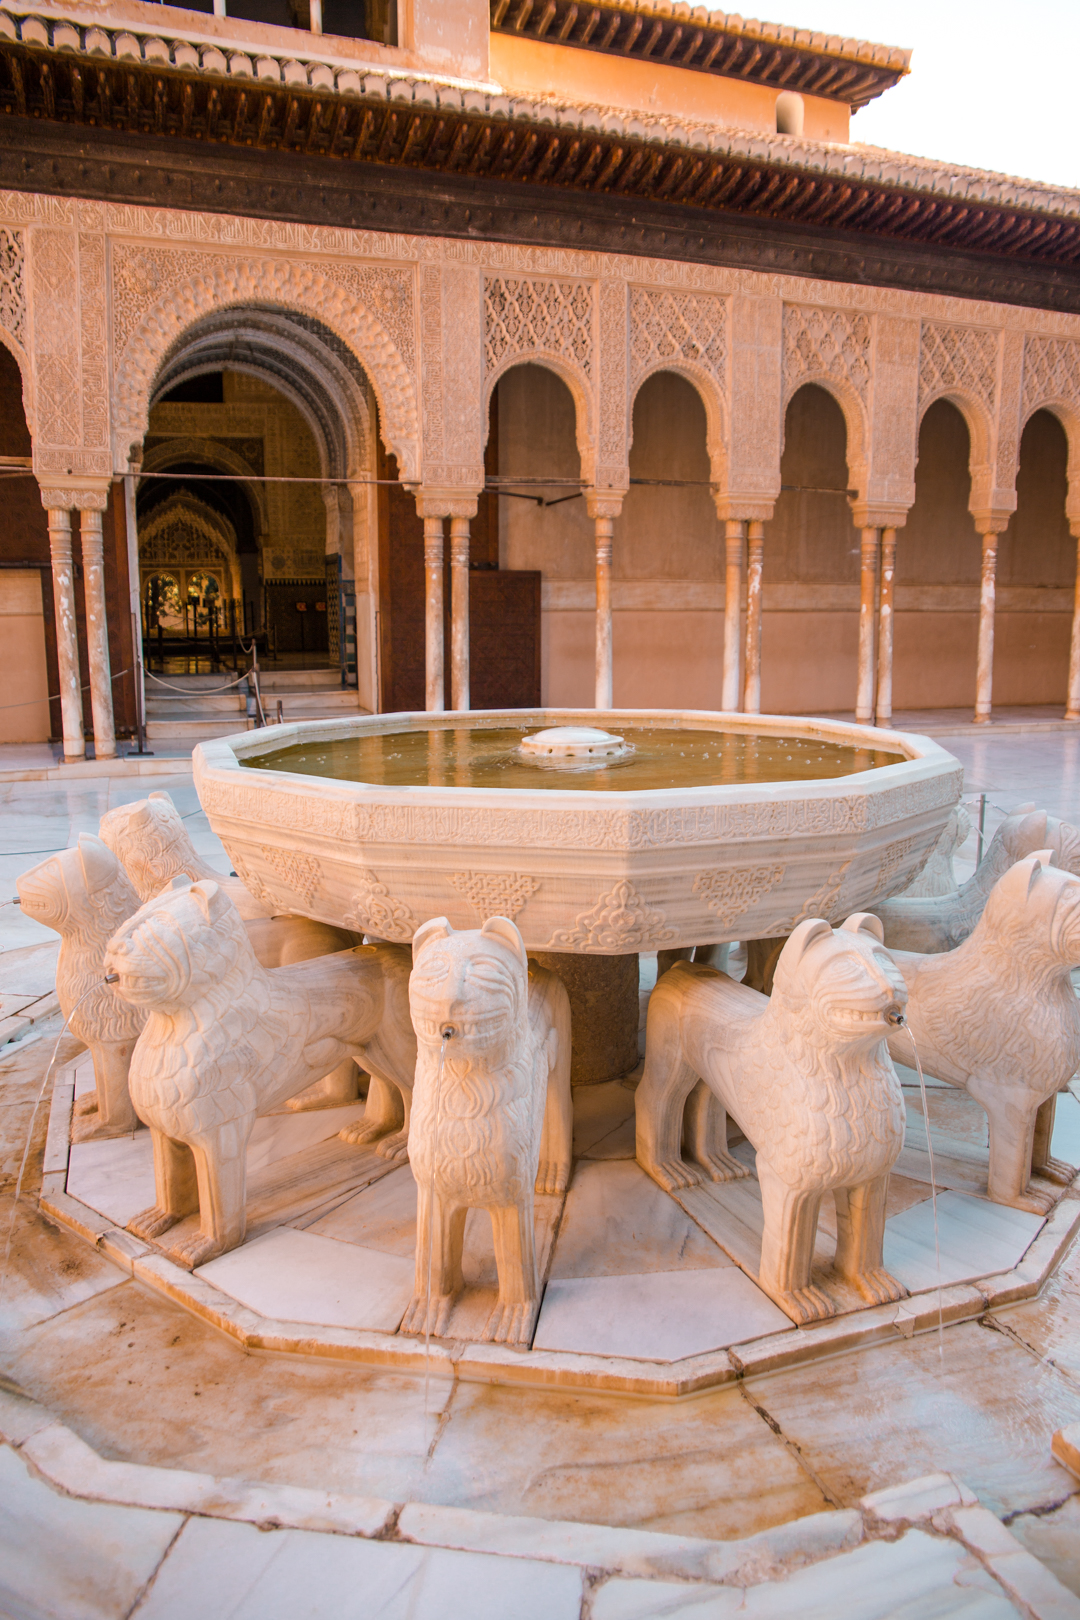 Fountain of the Lions in the Alhambra.